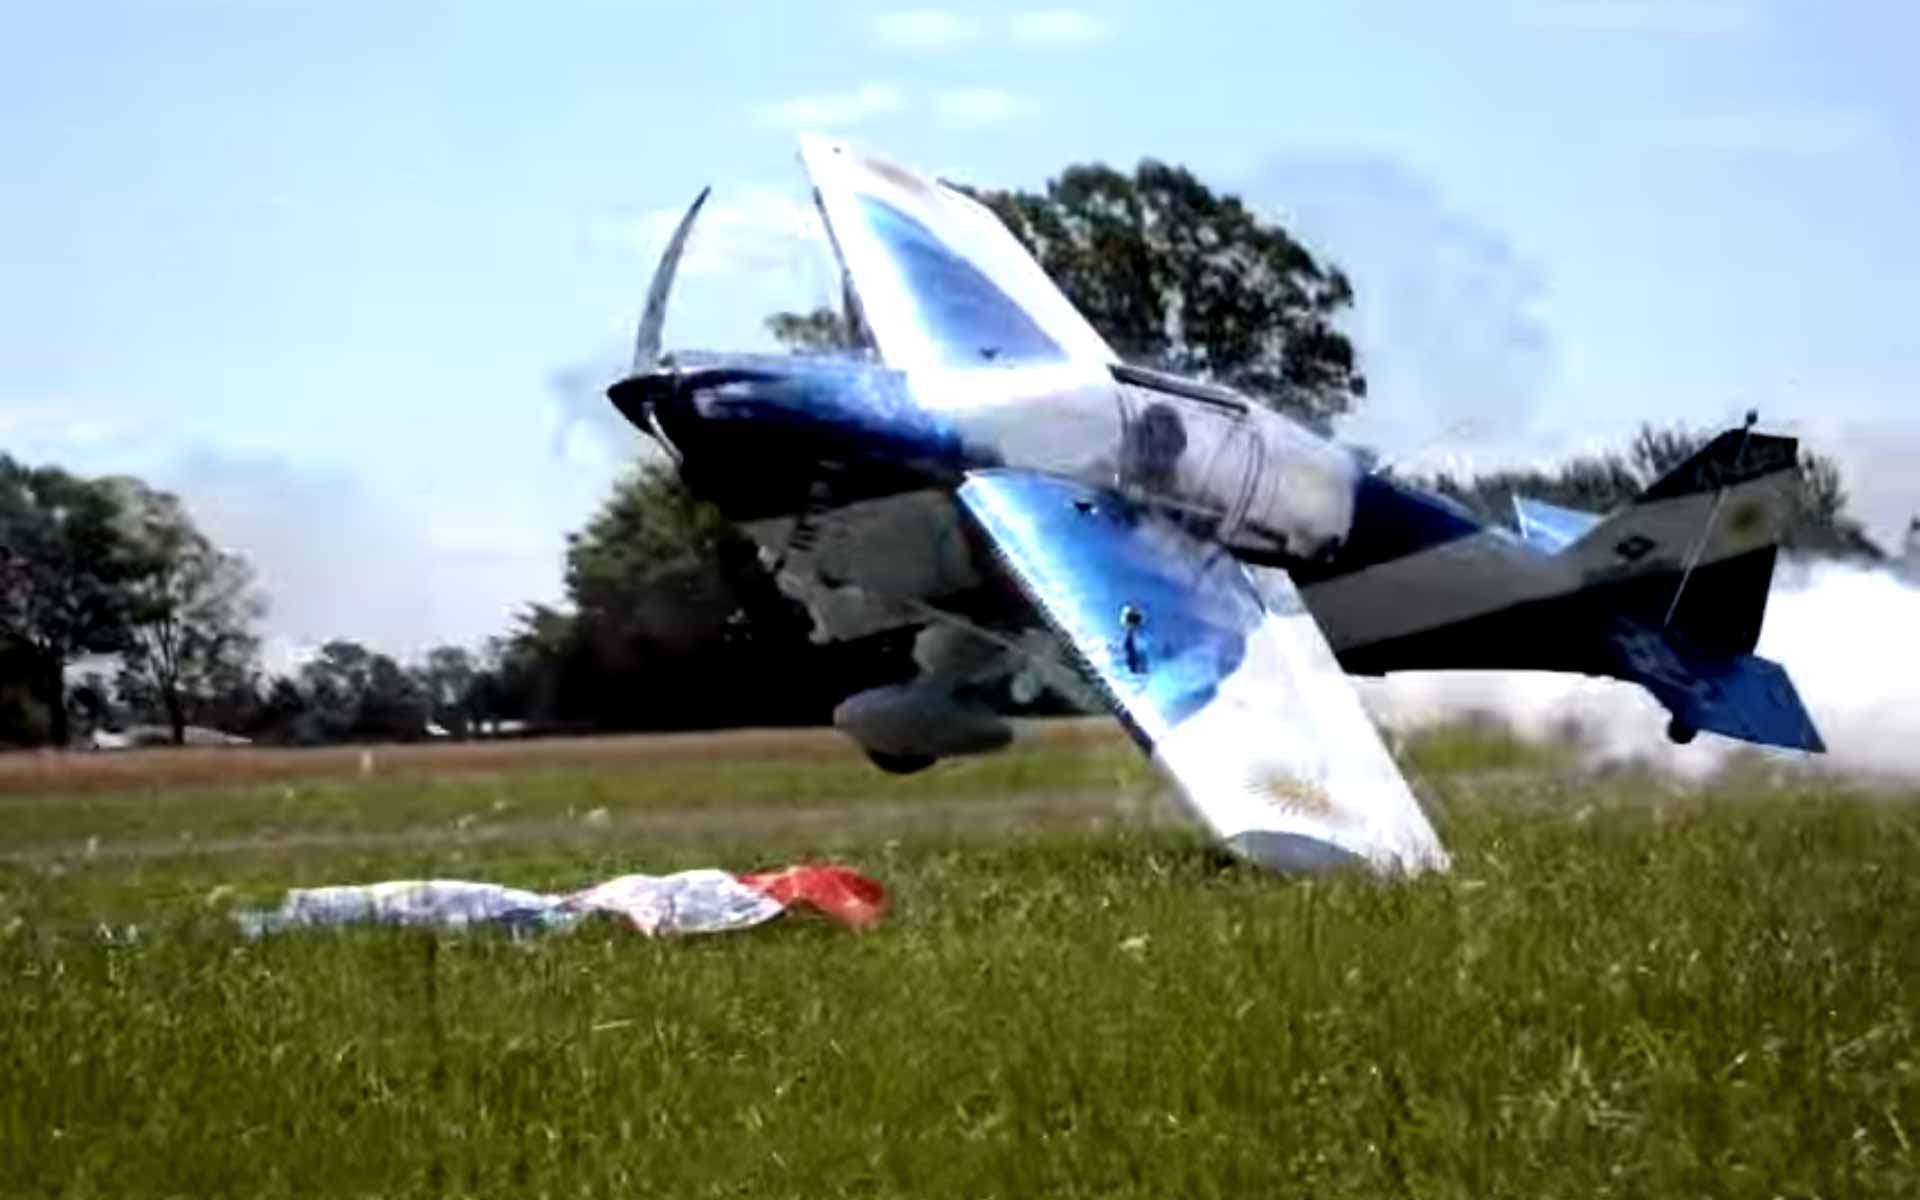 Low-Flying Plane Picks Up Flags From Ground